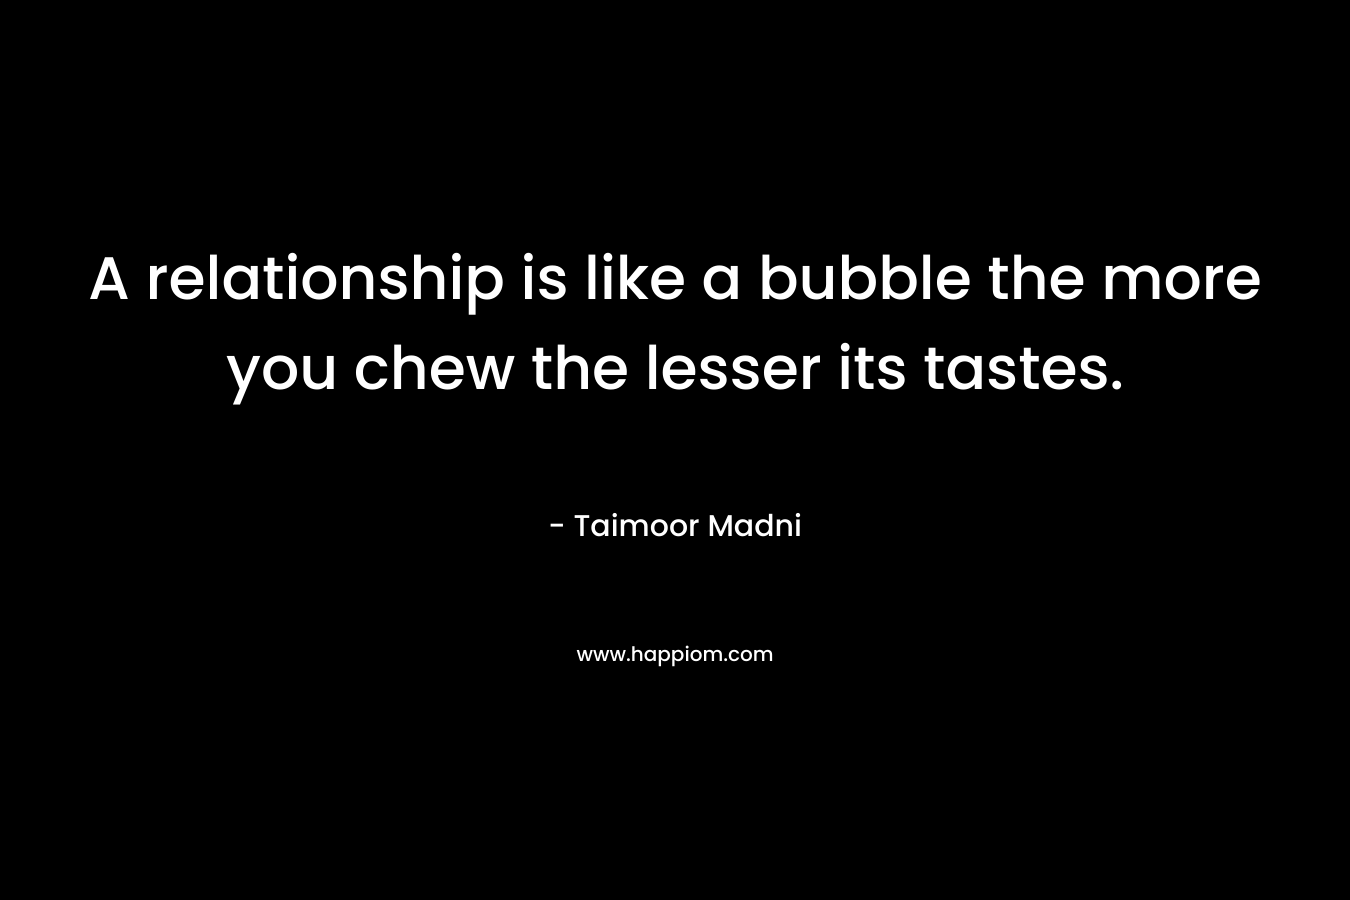 A relationship is like a bubble the more you chew the lesser its tastes.